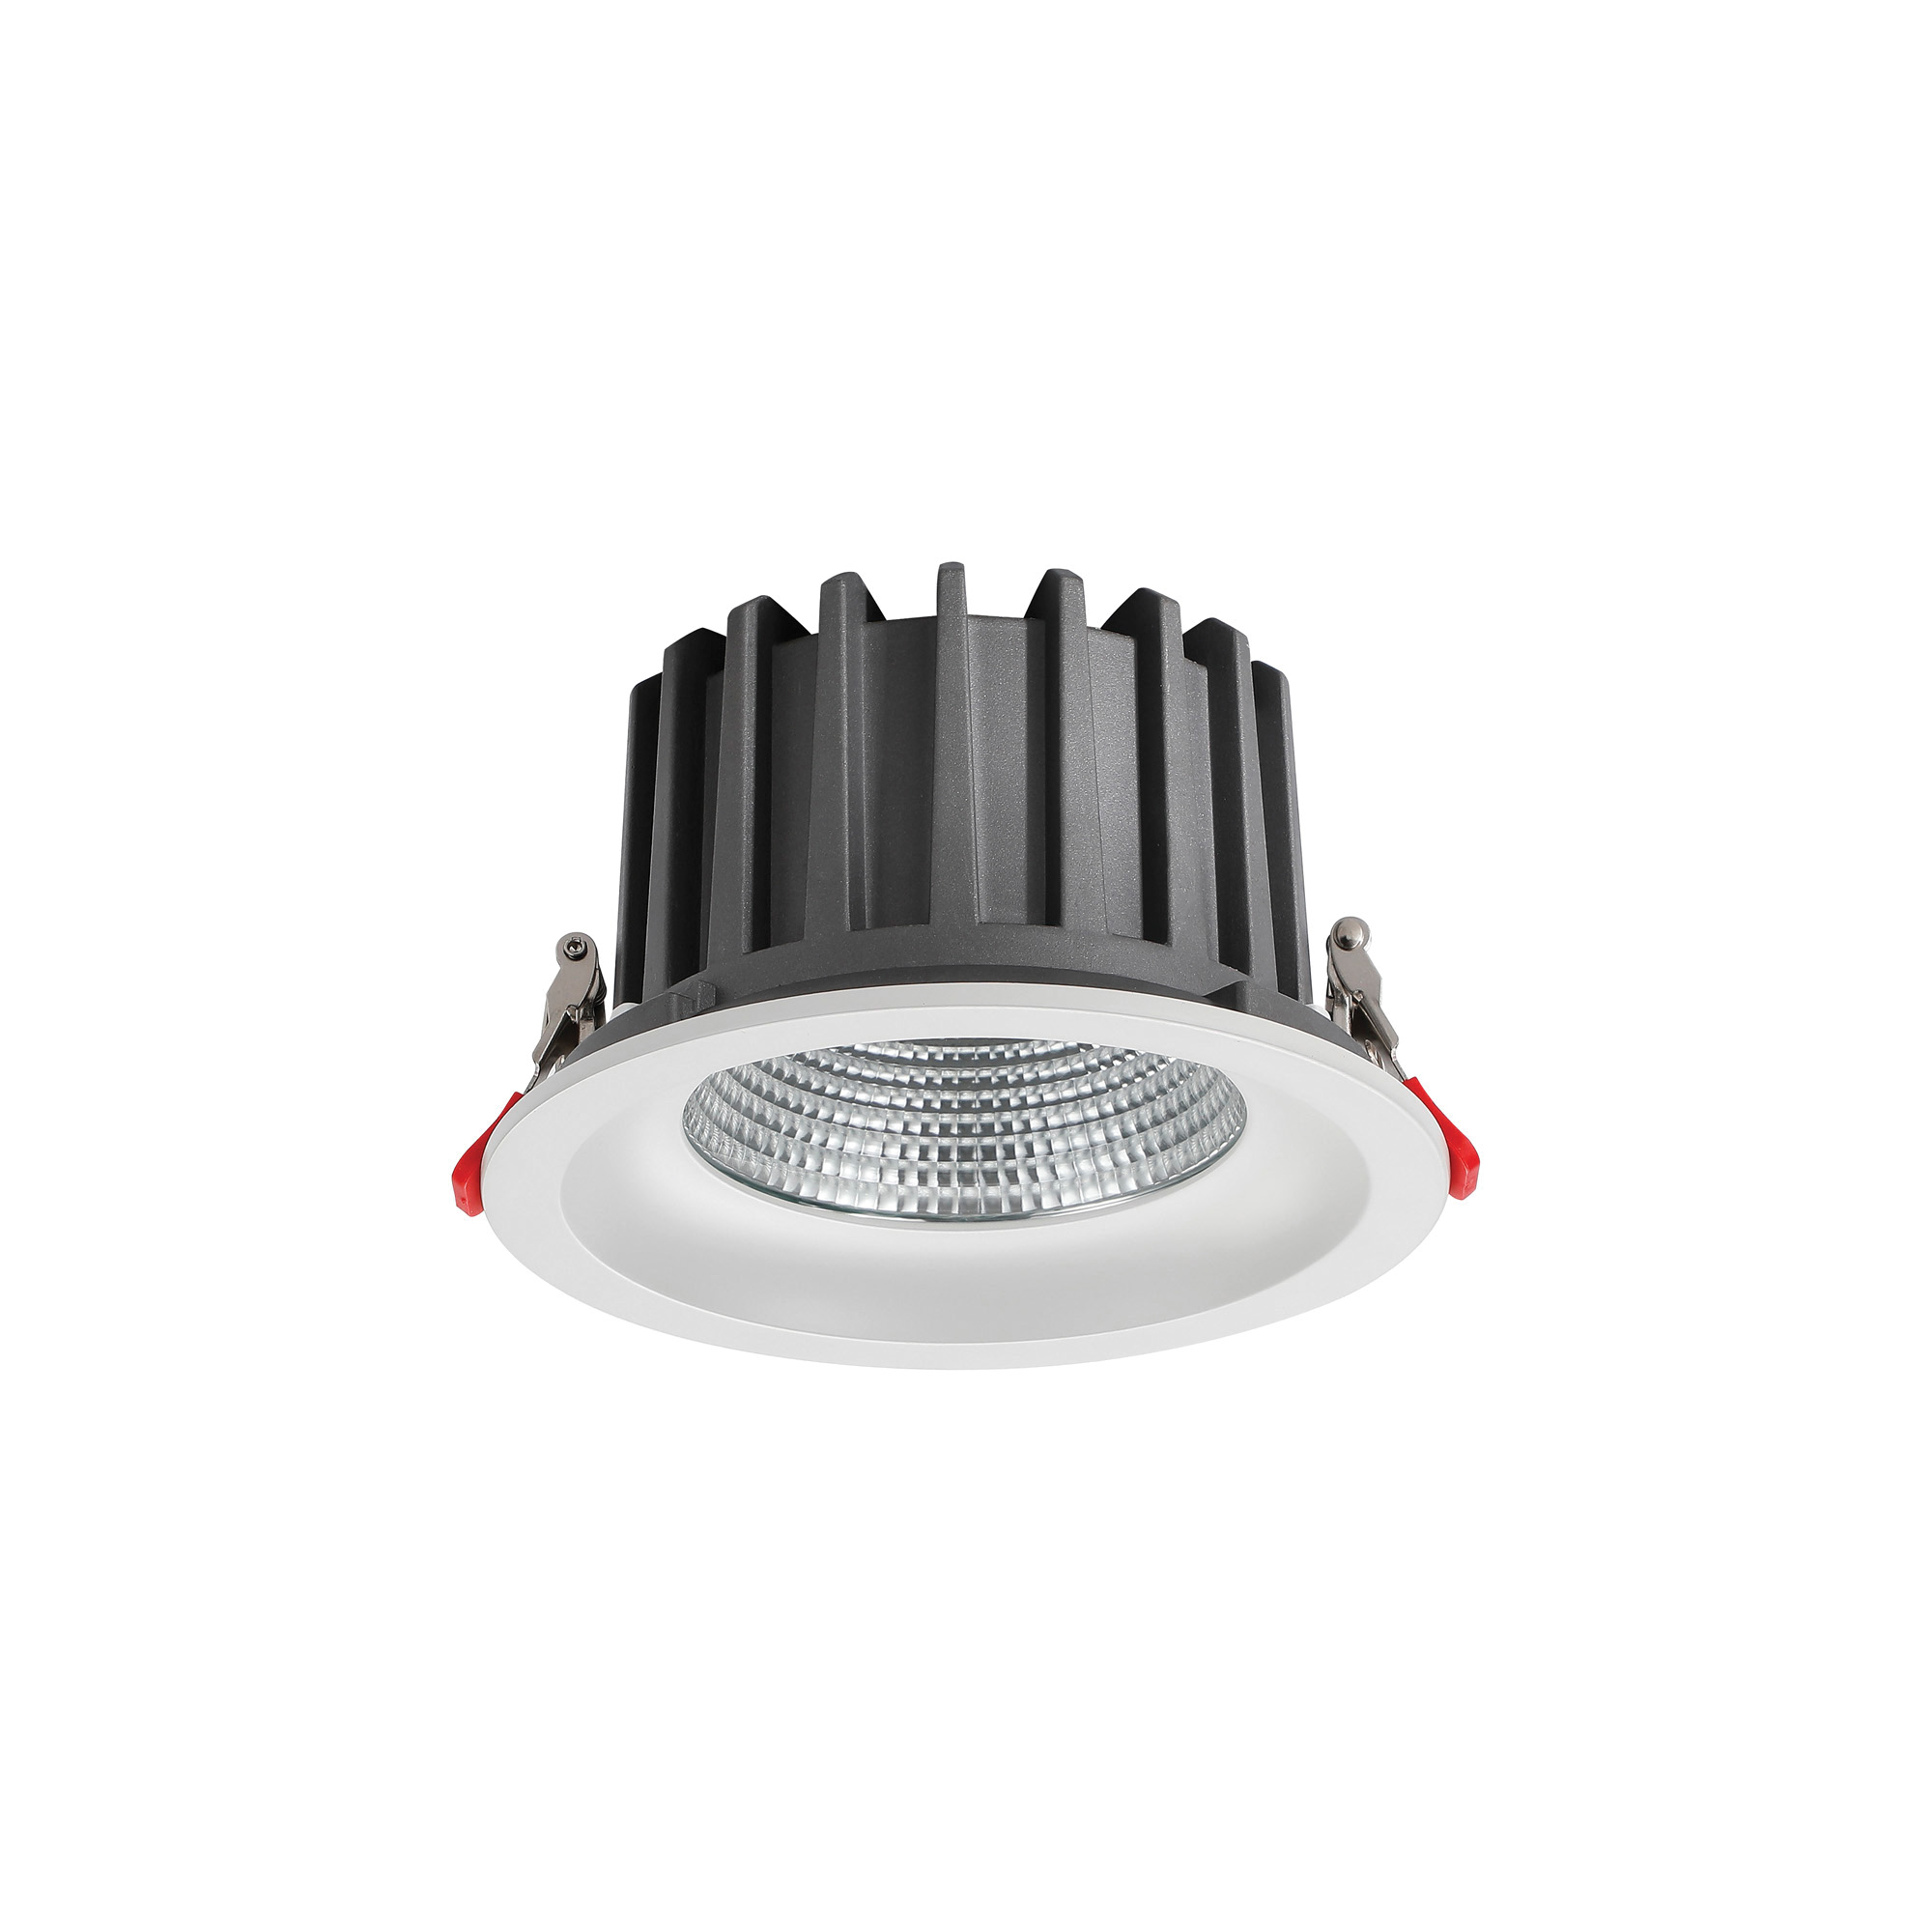 DL200060  Bionic 24, 24W, 700mA, White Deep Round Recessed Downlight, 2040lm ,Cut Out 155mm, 42° , 5000K, IP44, DRIVER INC., 5yrs Warranty.